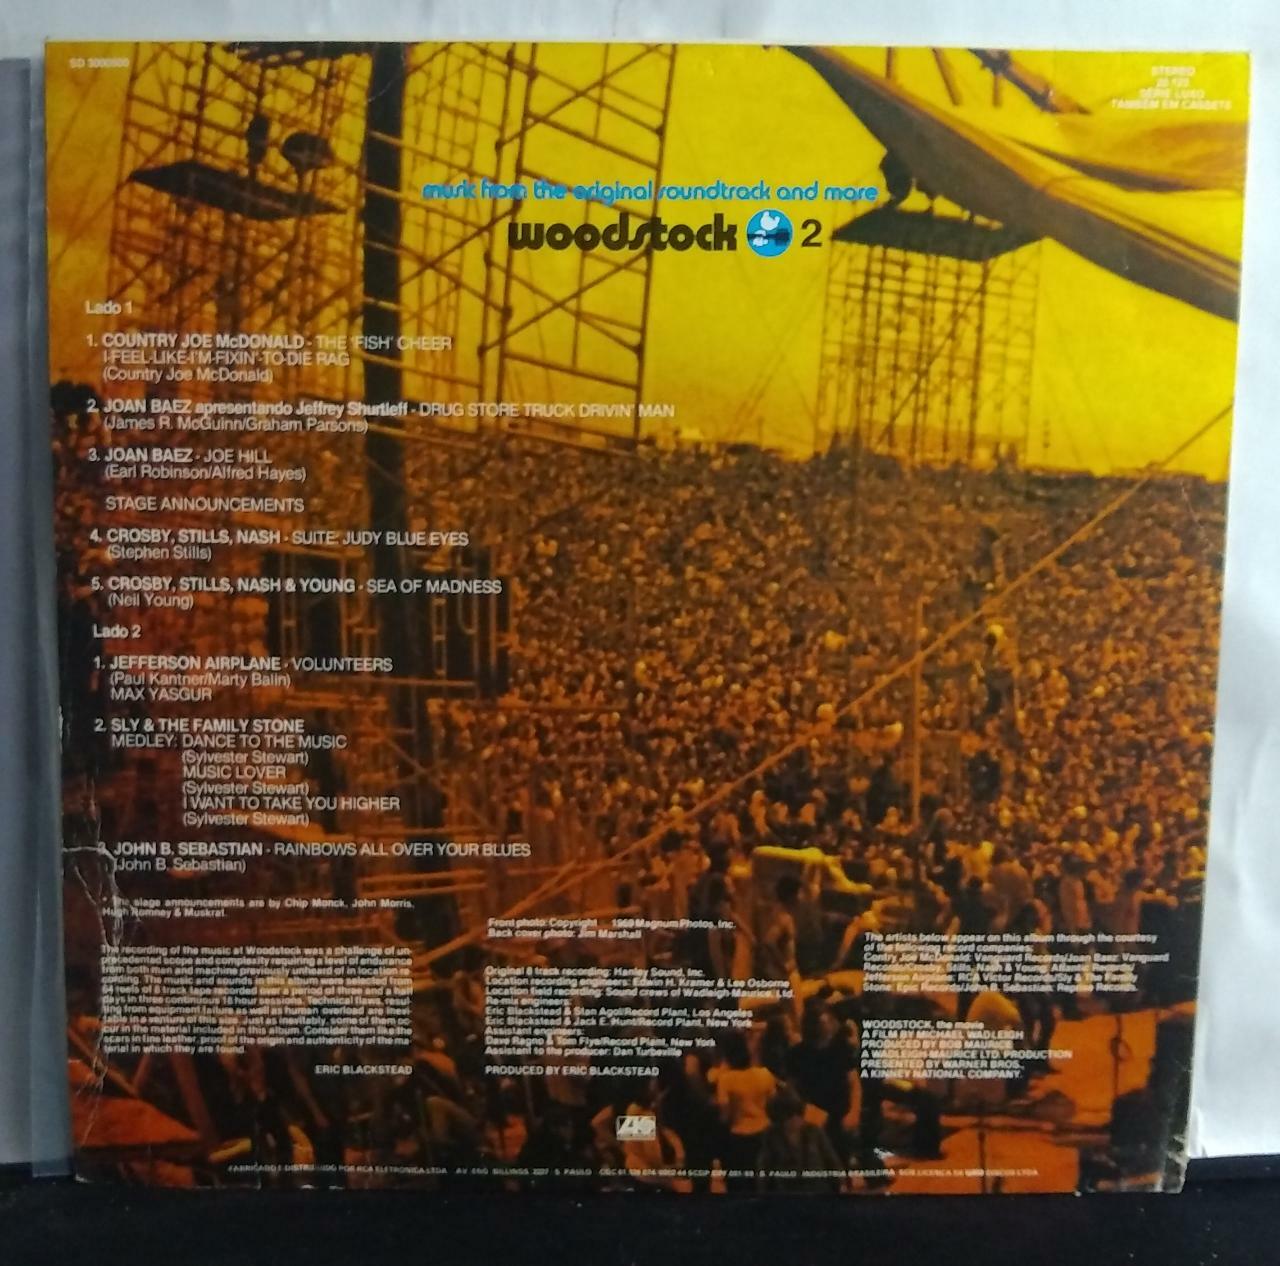 Vinil - Woodstock 2 - Music from the Original Soundtrack and More